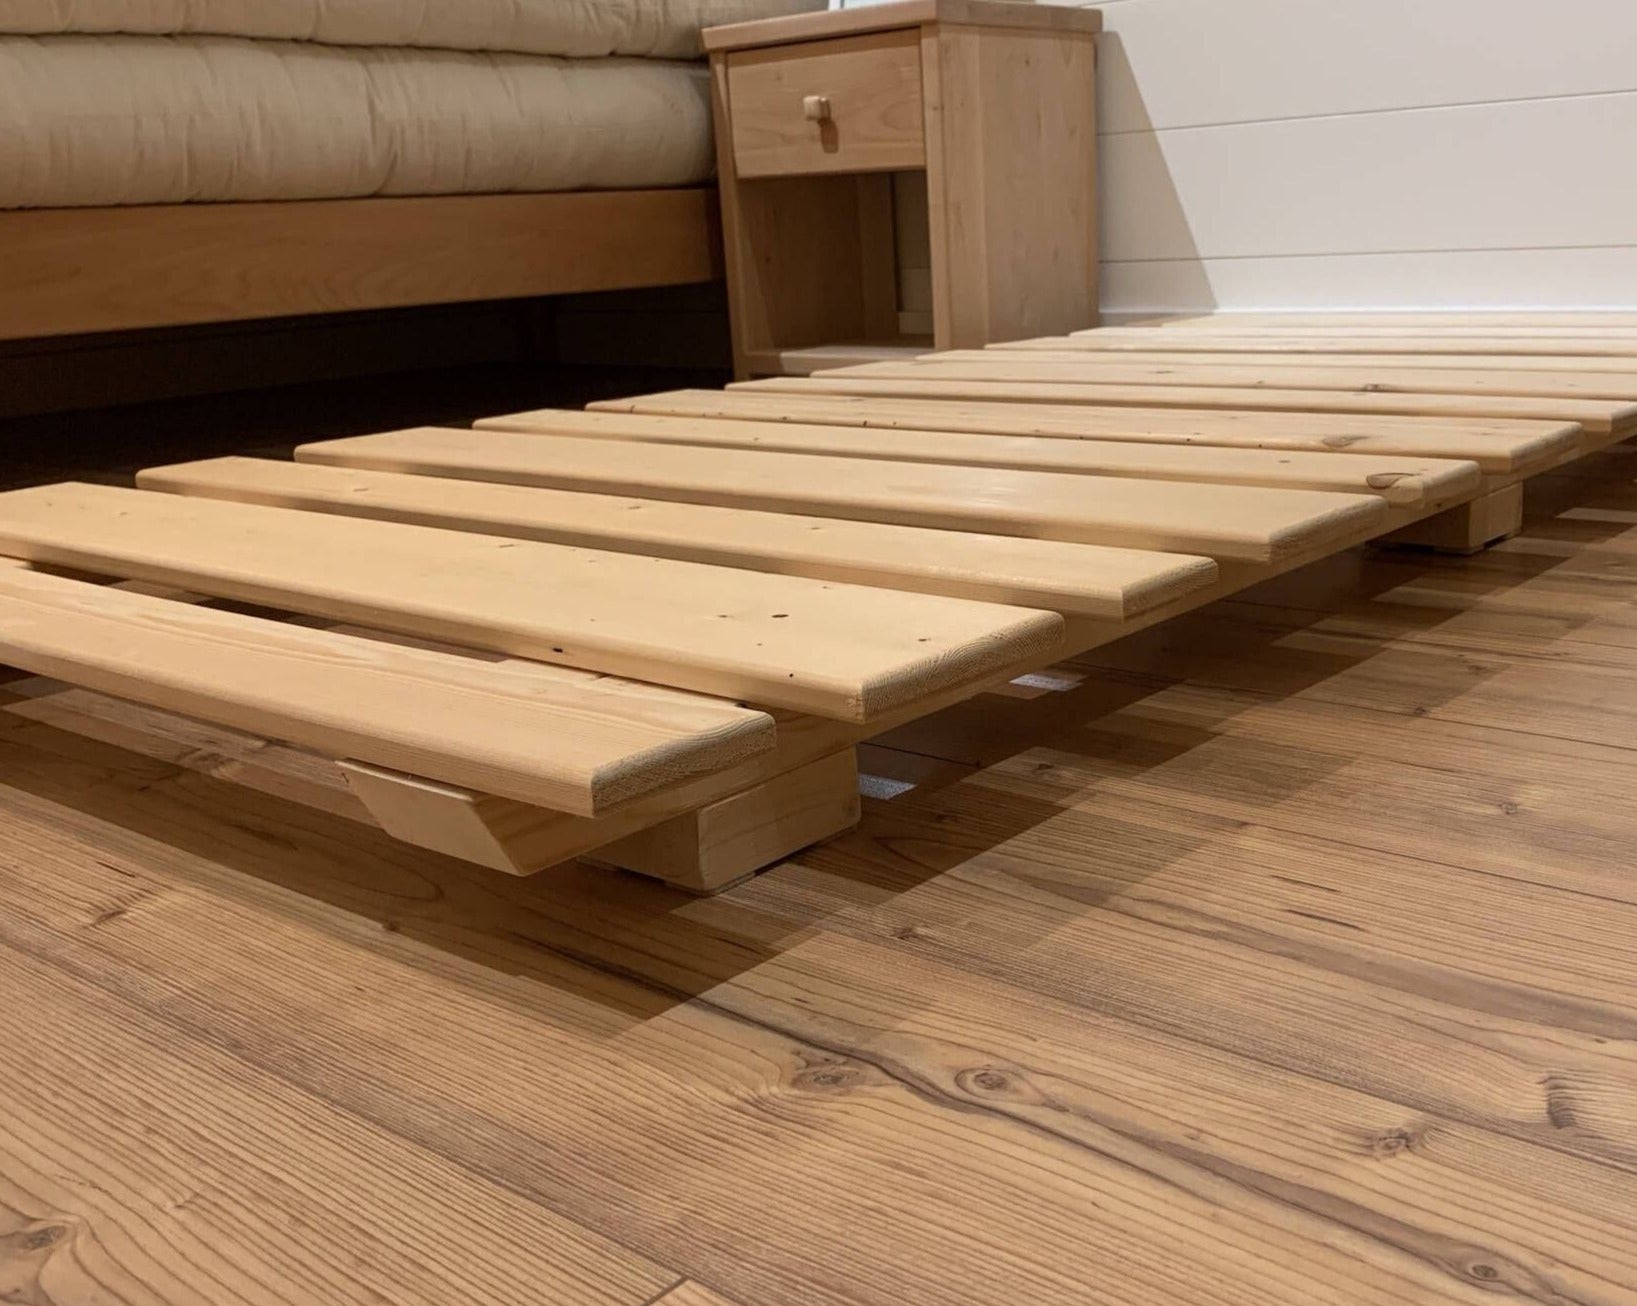 At 2.25” height, the hand-built Simple Slat Base provides a low-profile solution for a grounding sleep experience. Sturdy, untreated wood slats for proper airflow and support.